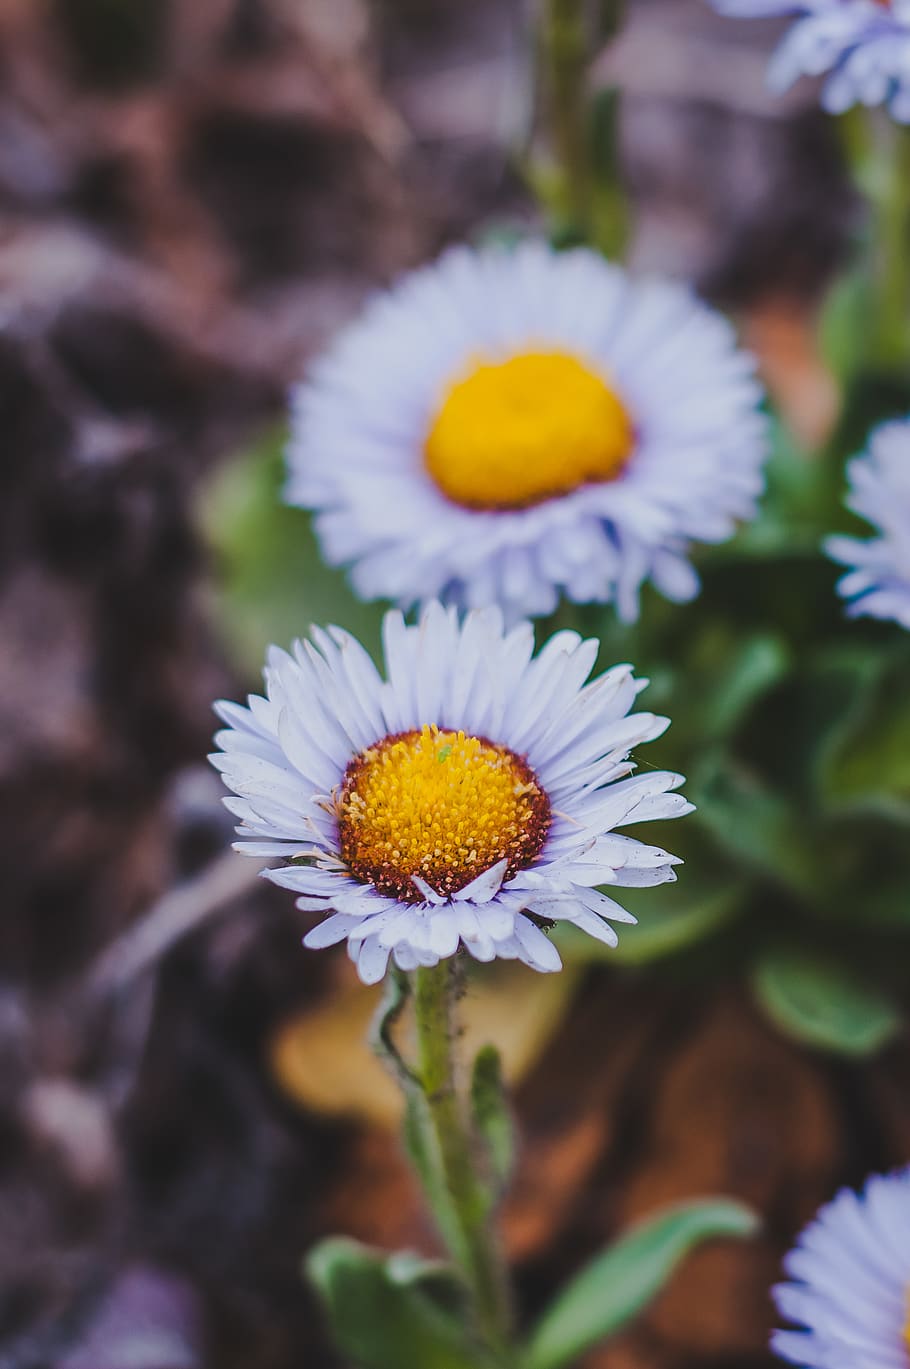 plant, blossom, daisies, daisy, pollen, chickweed flower, united states, HD wallpaper